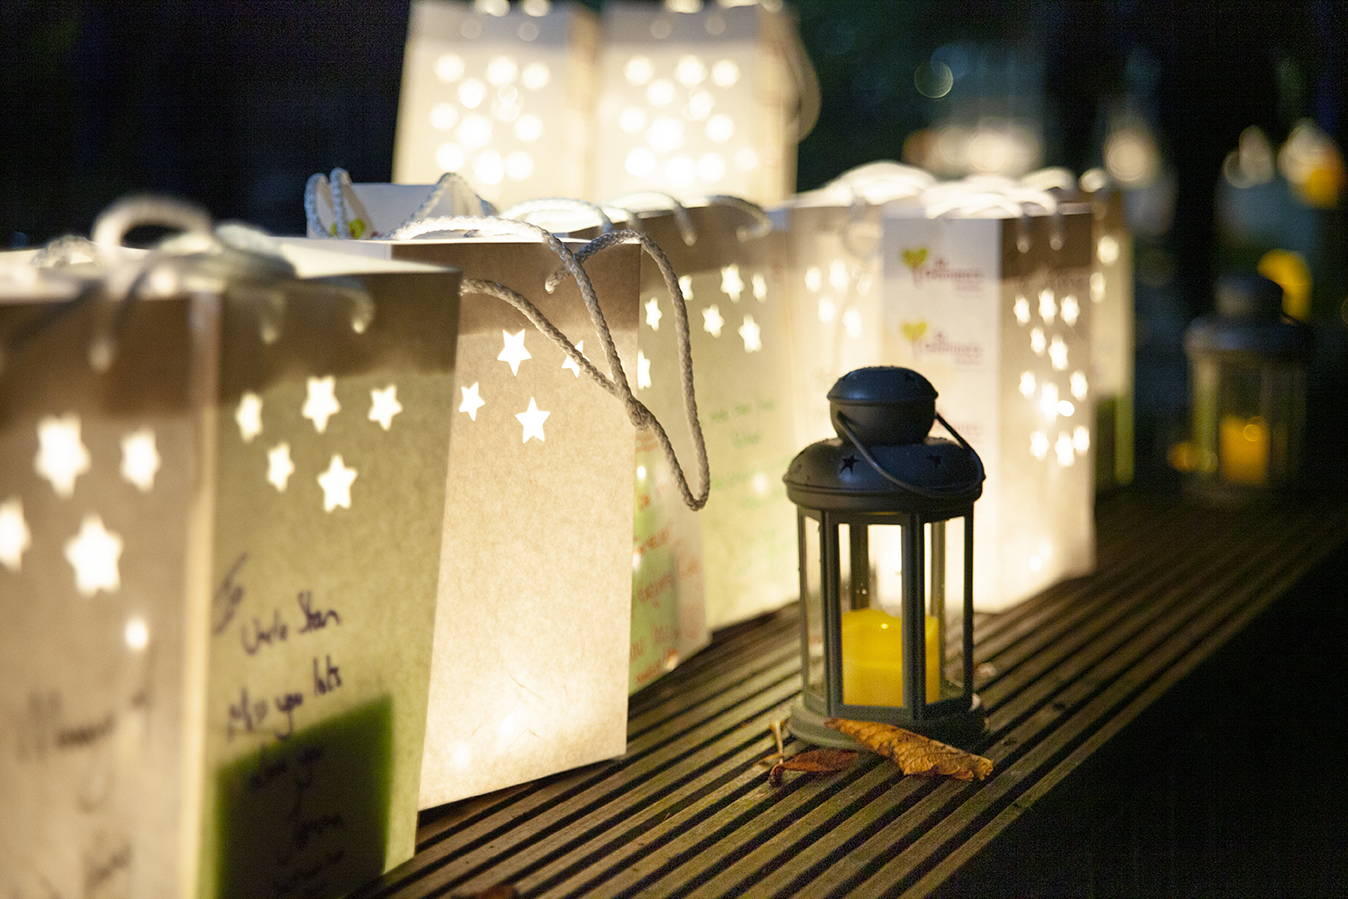 Handmade paper lanterns with micro lights inside in remembrance of loved ones. 